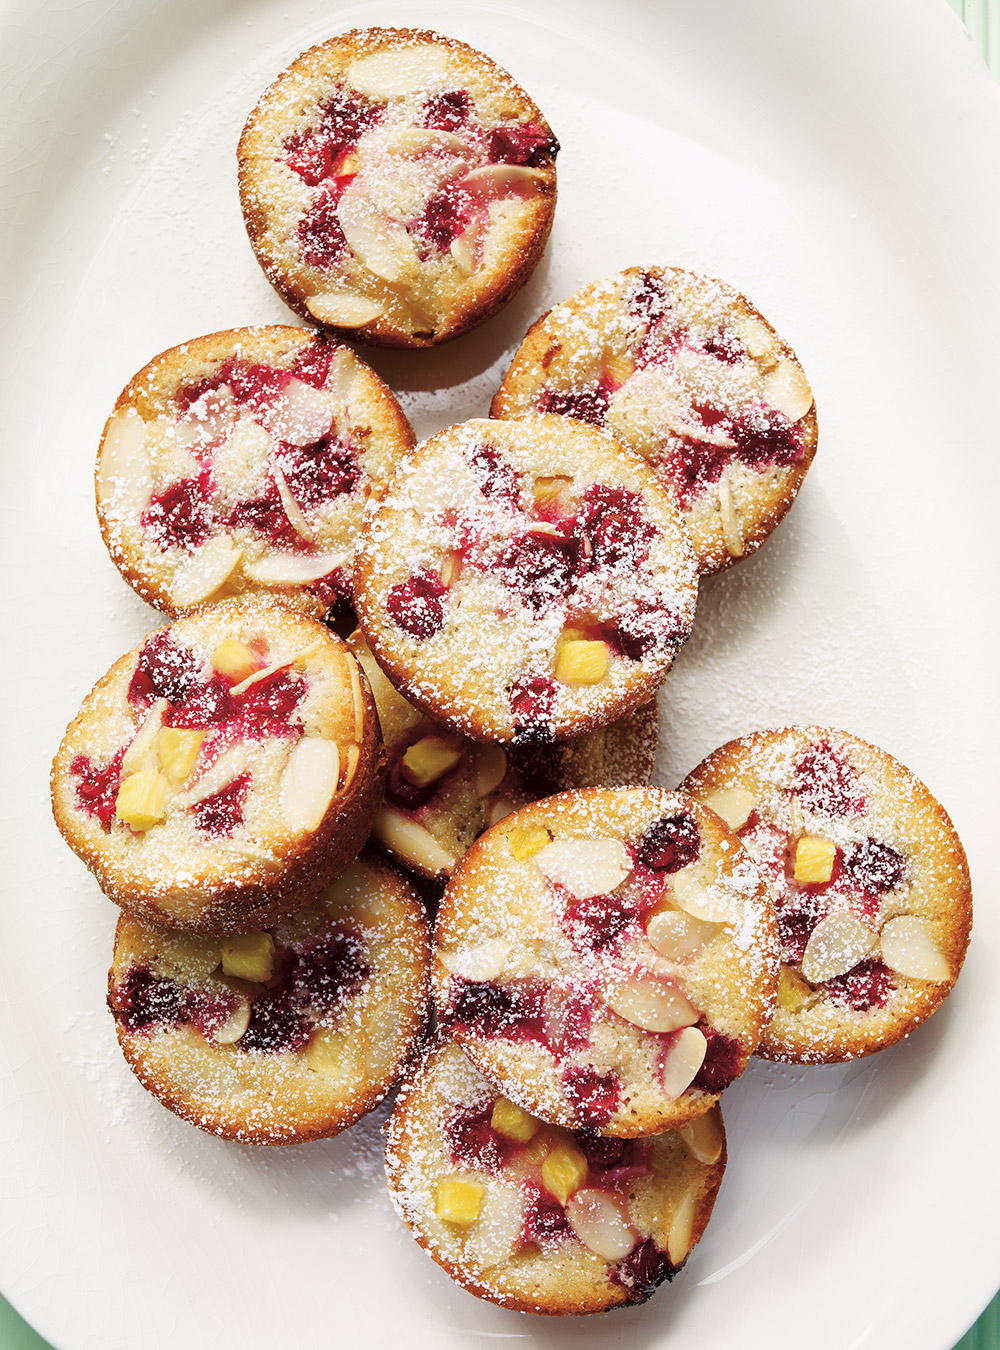 Cranberry and Pineapple Financiers